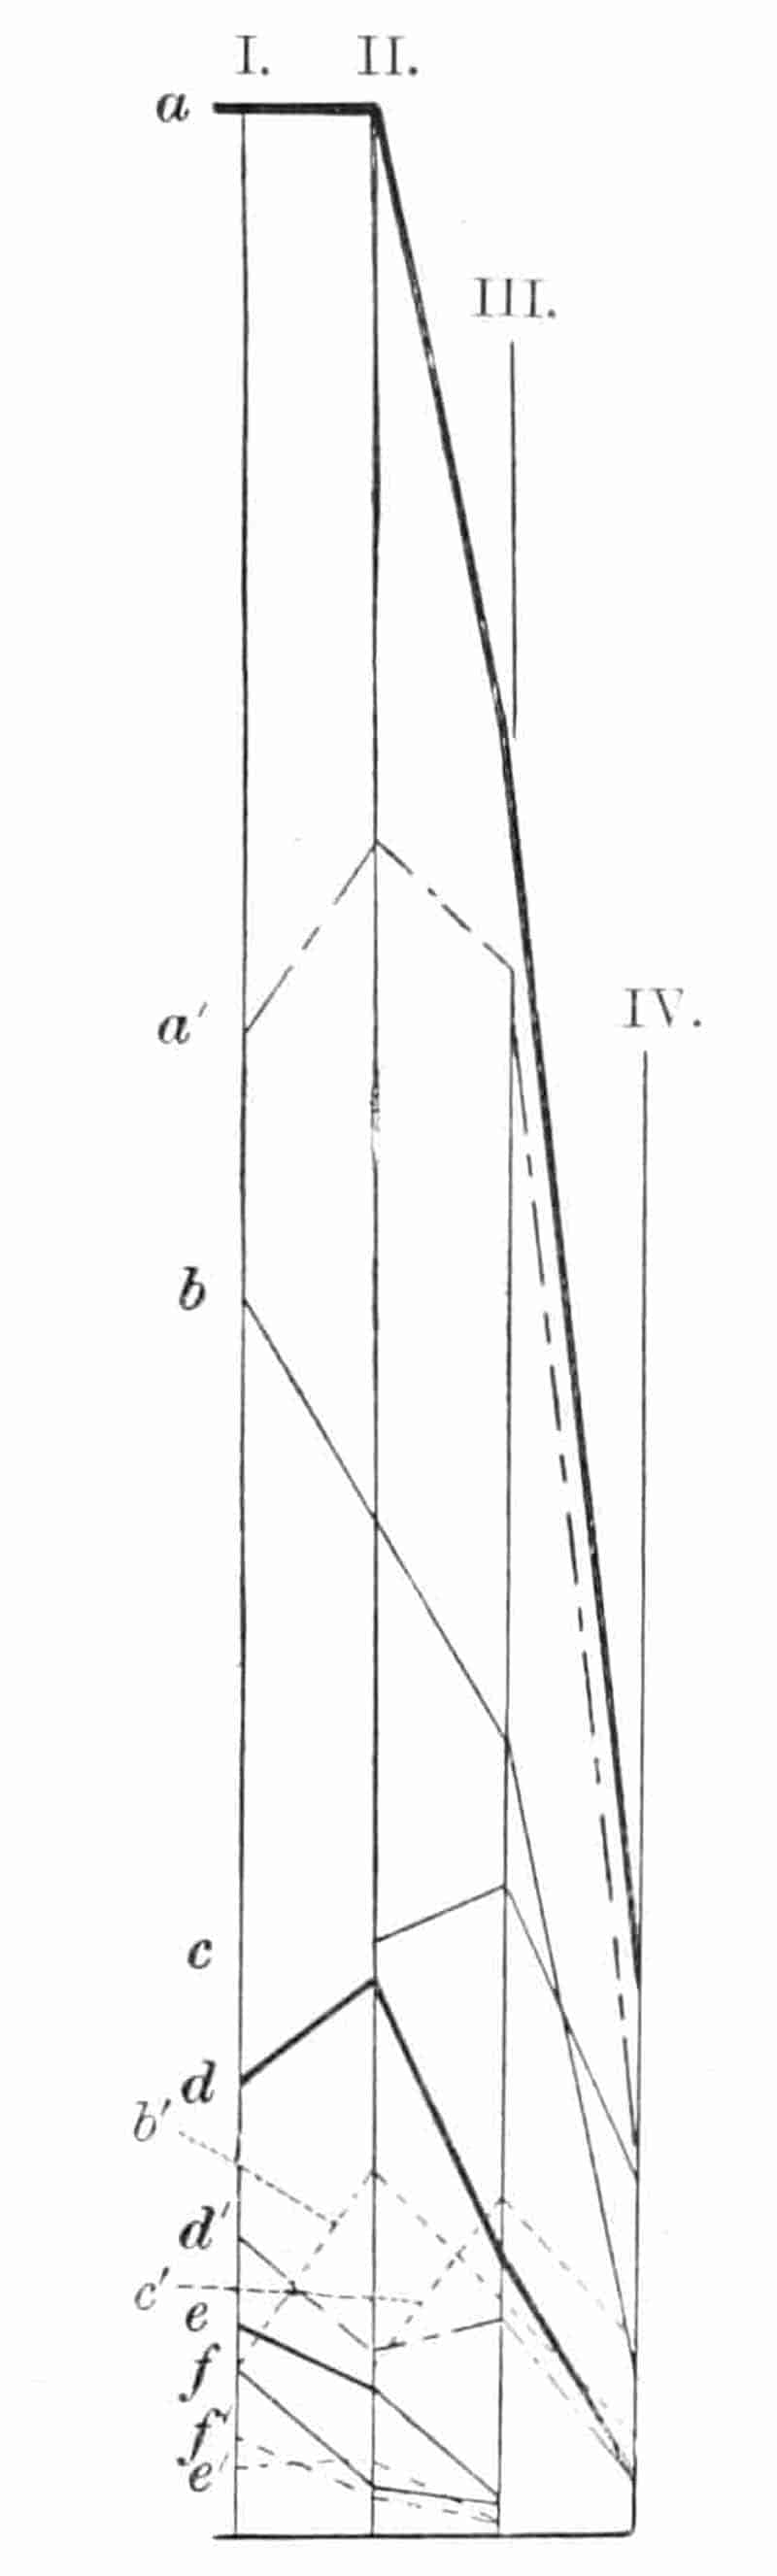 fig122